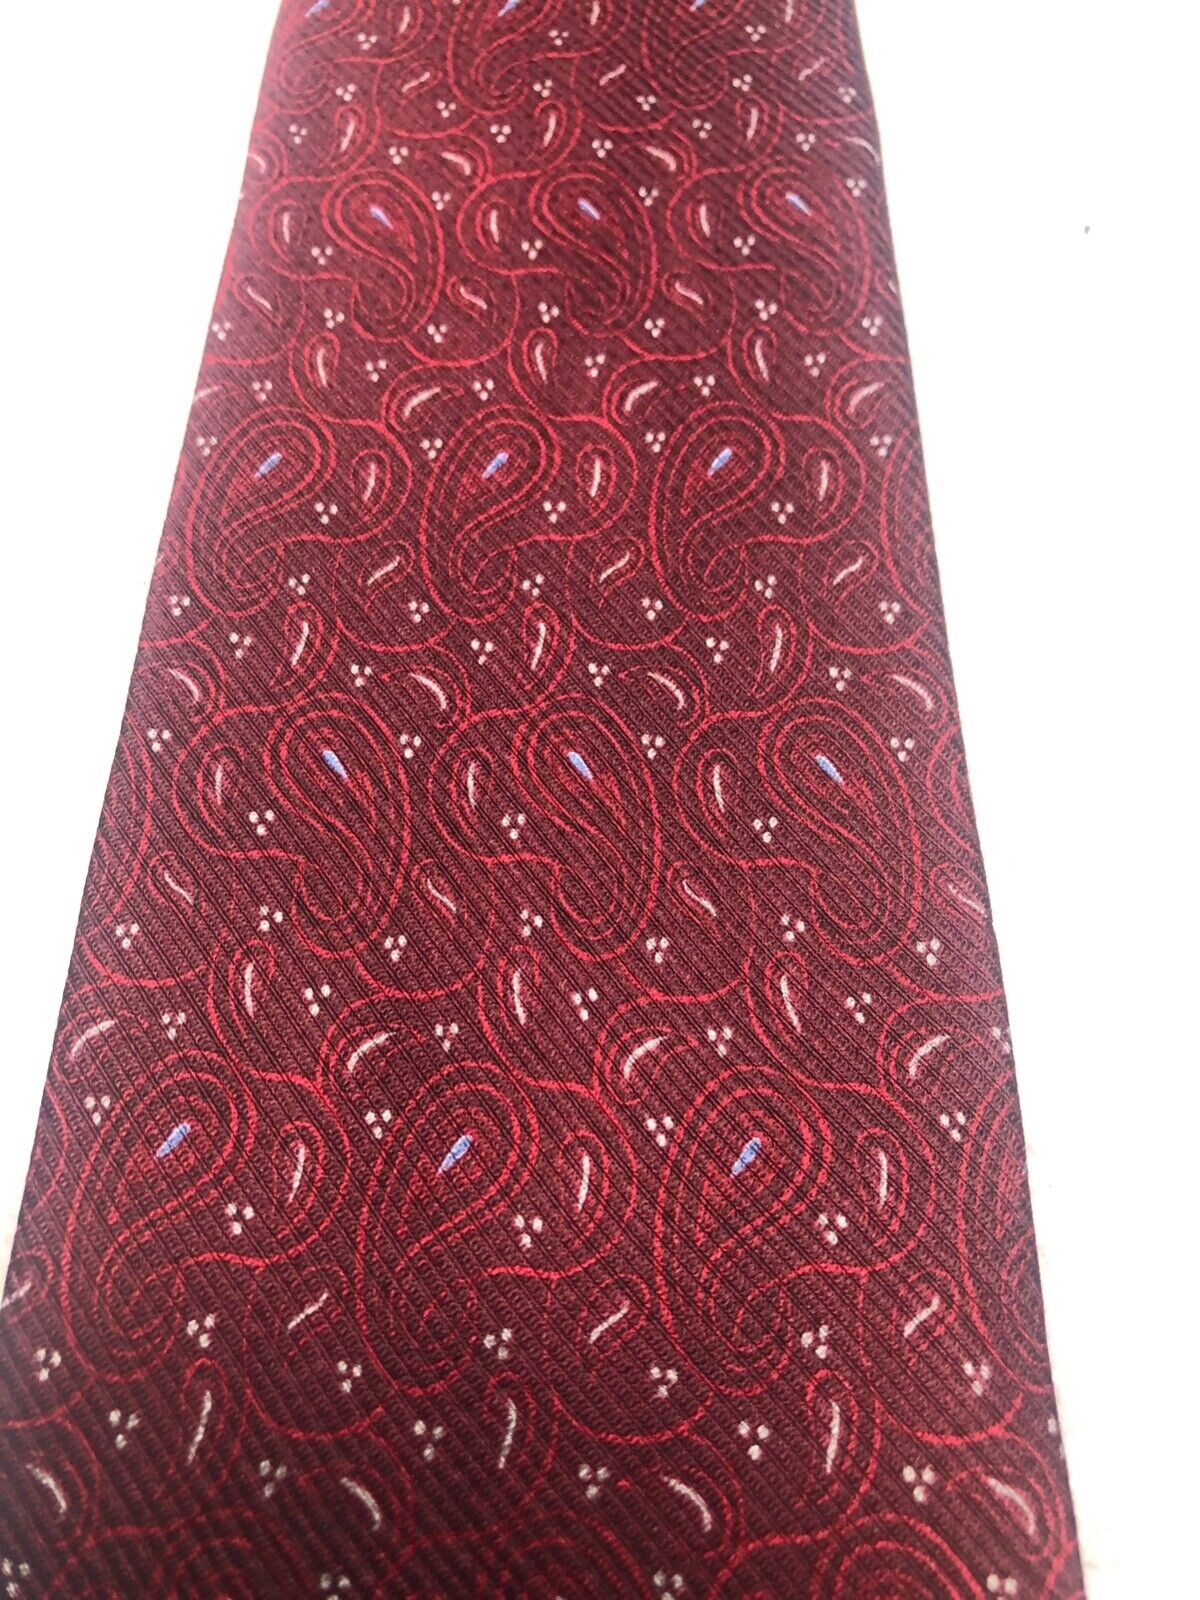 NAUTICA MENS TIE BURGUNDY WITH RED BLUE 4 X 61 - image 3